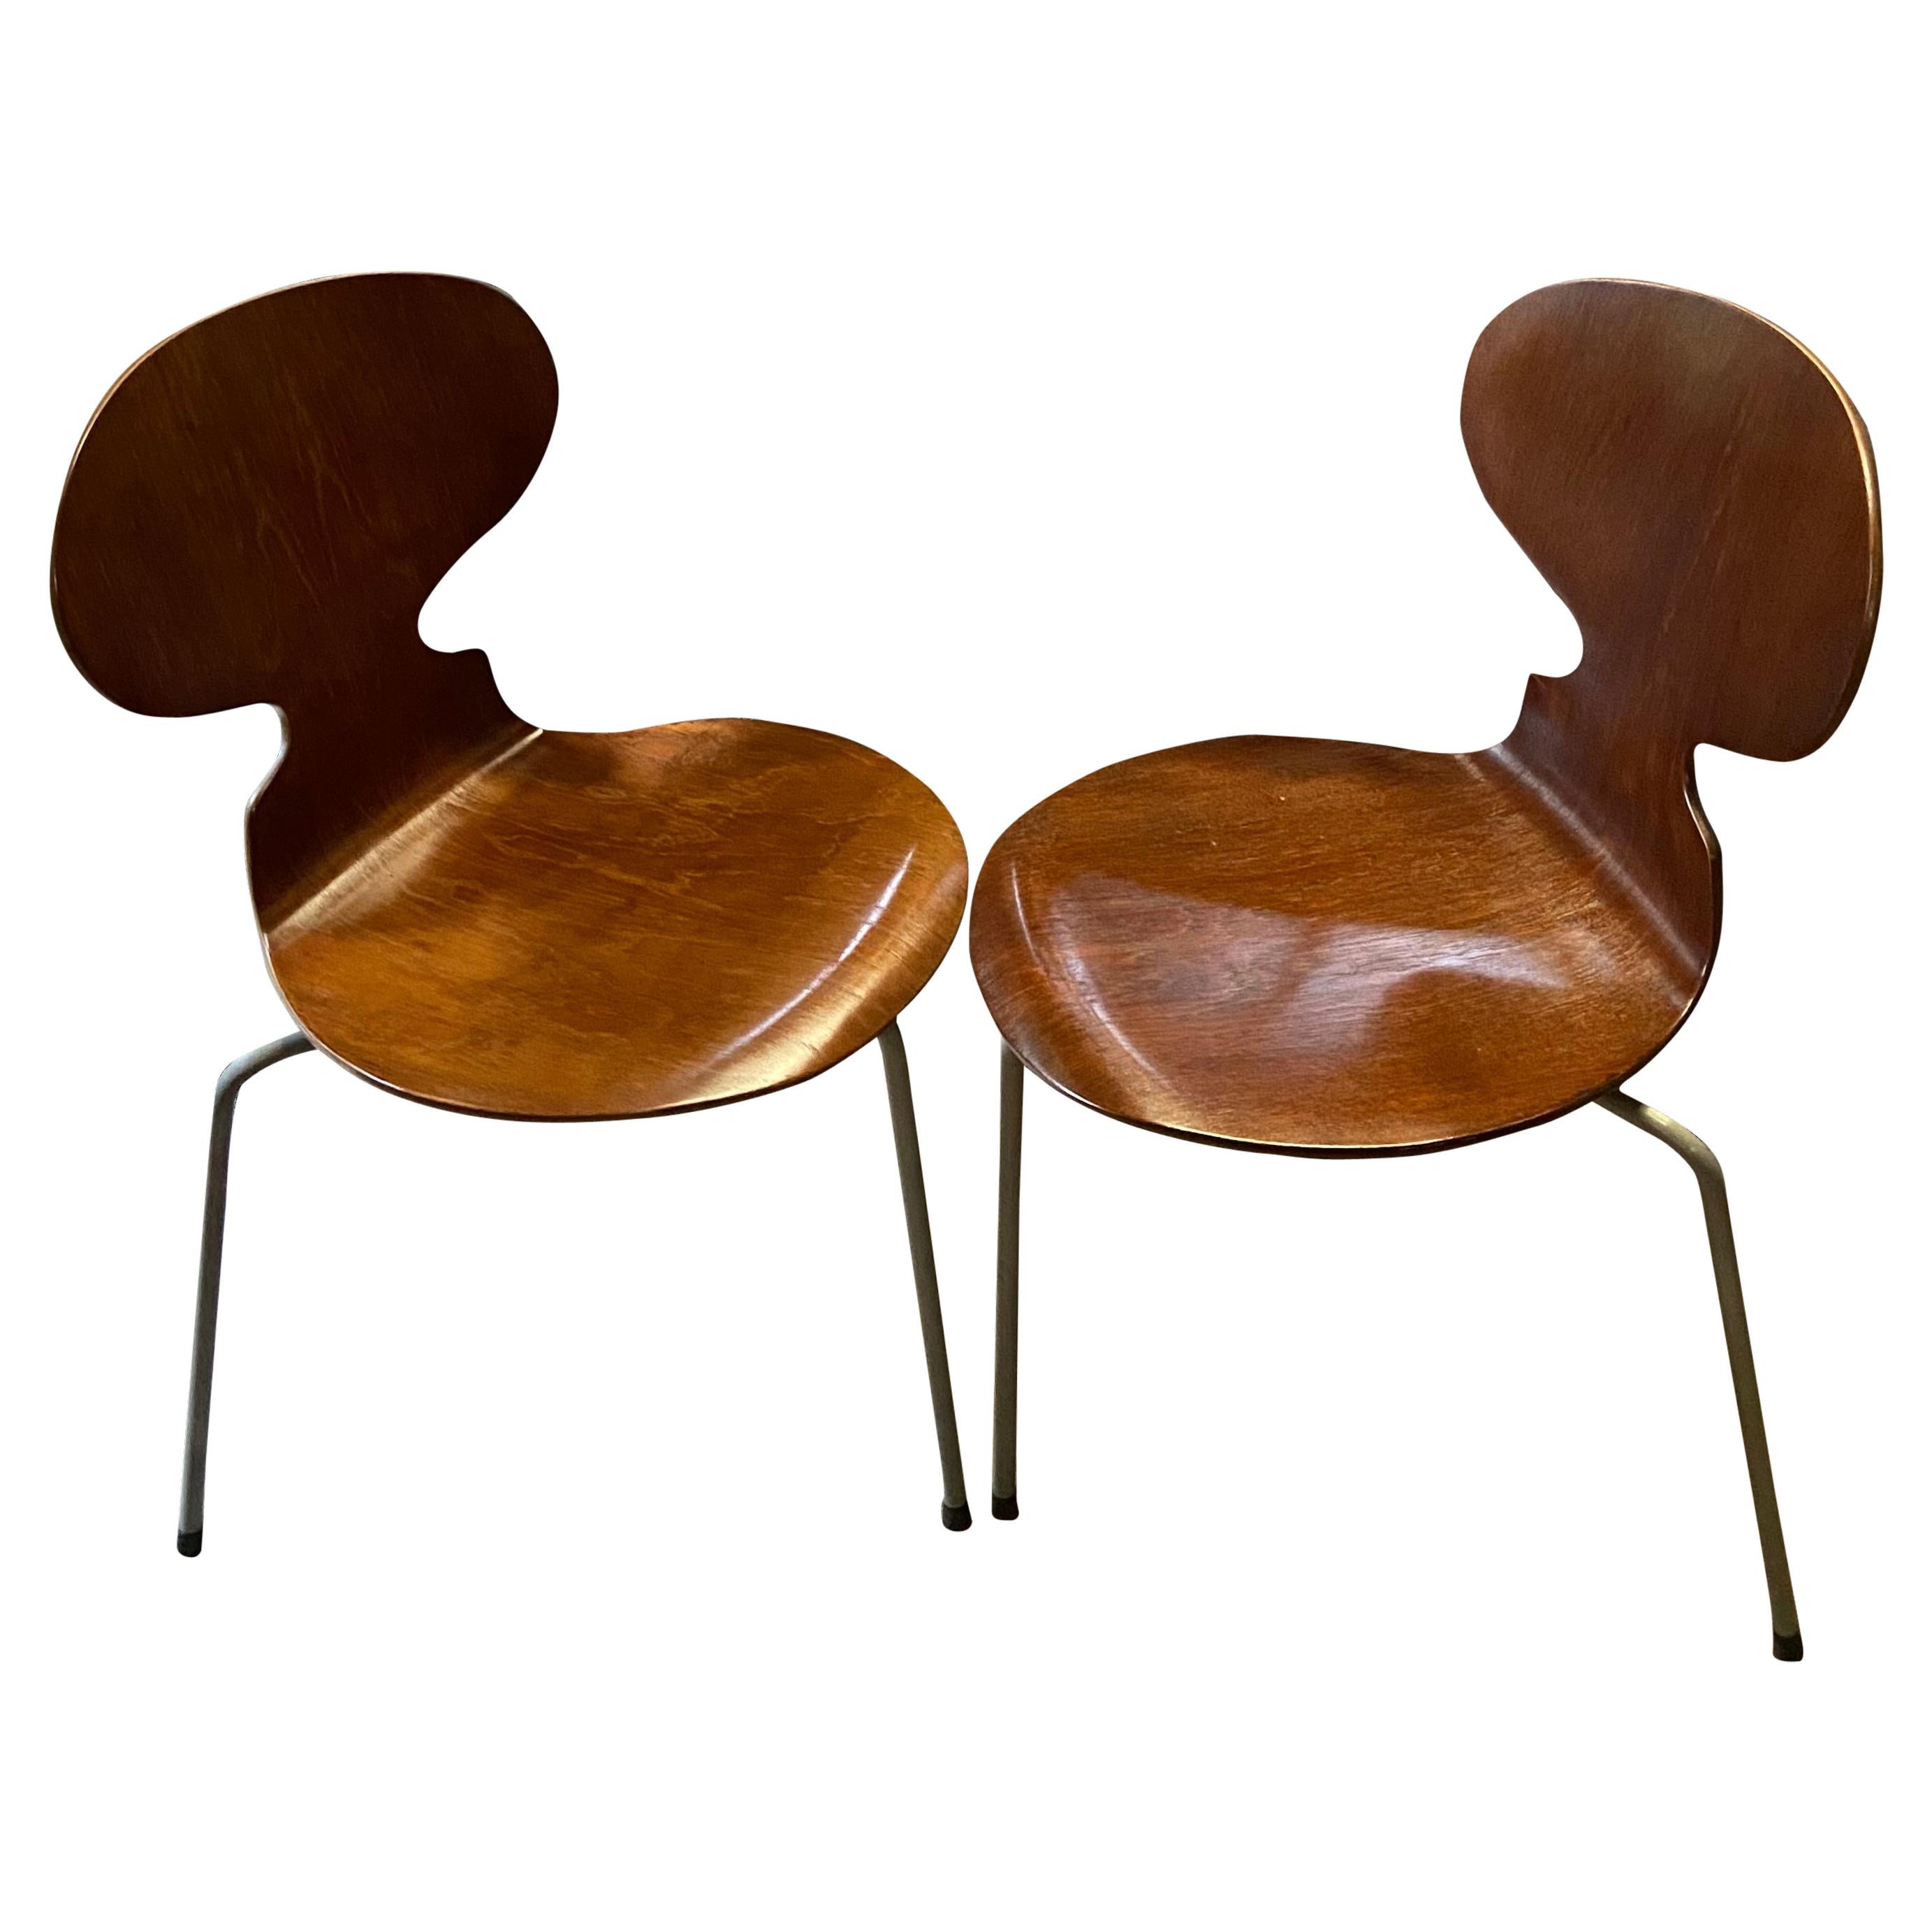 Four First Edition Ant Chairs by Arne Jacobsen for Fritz Hansen